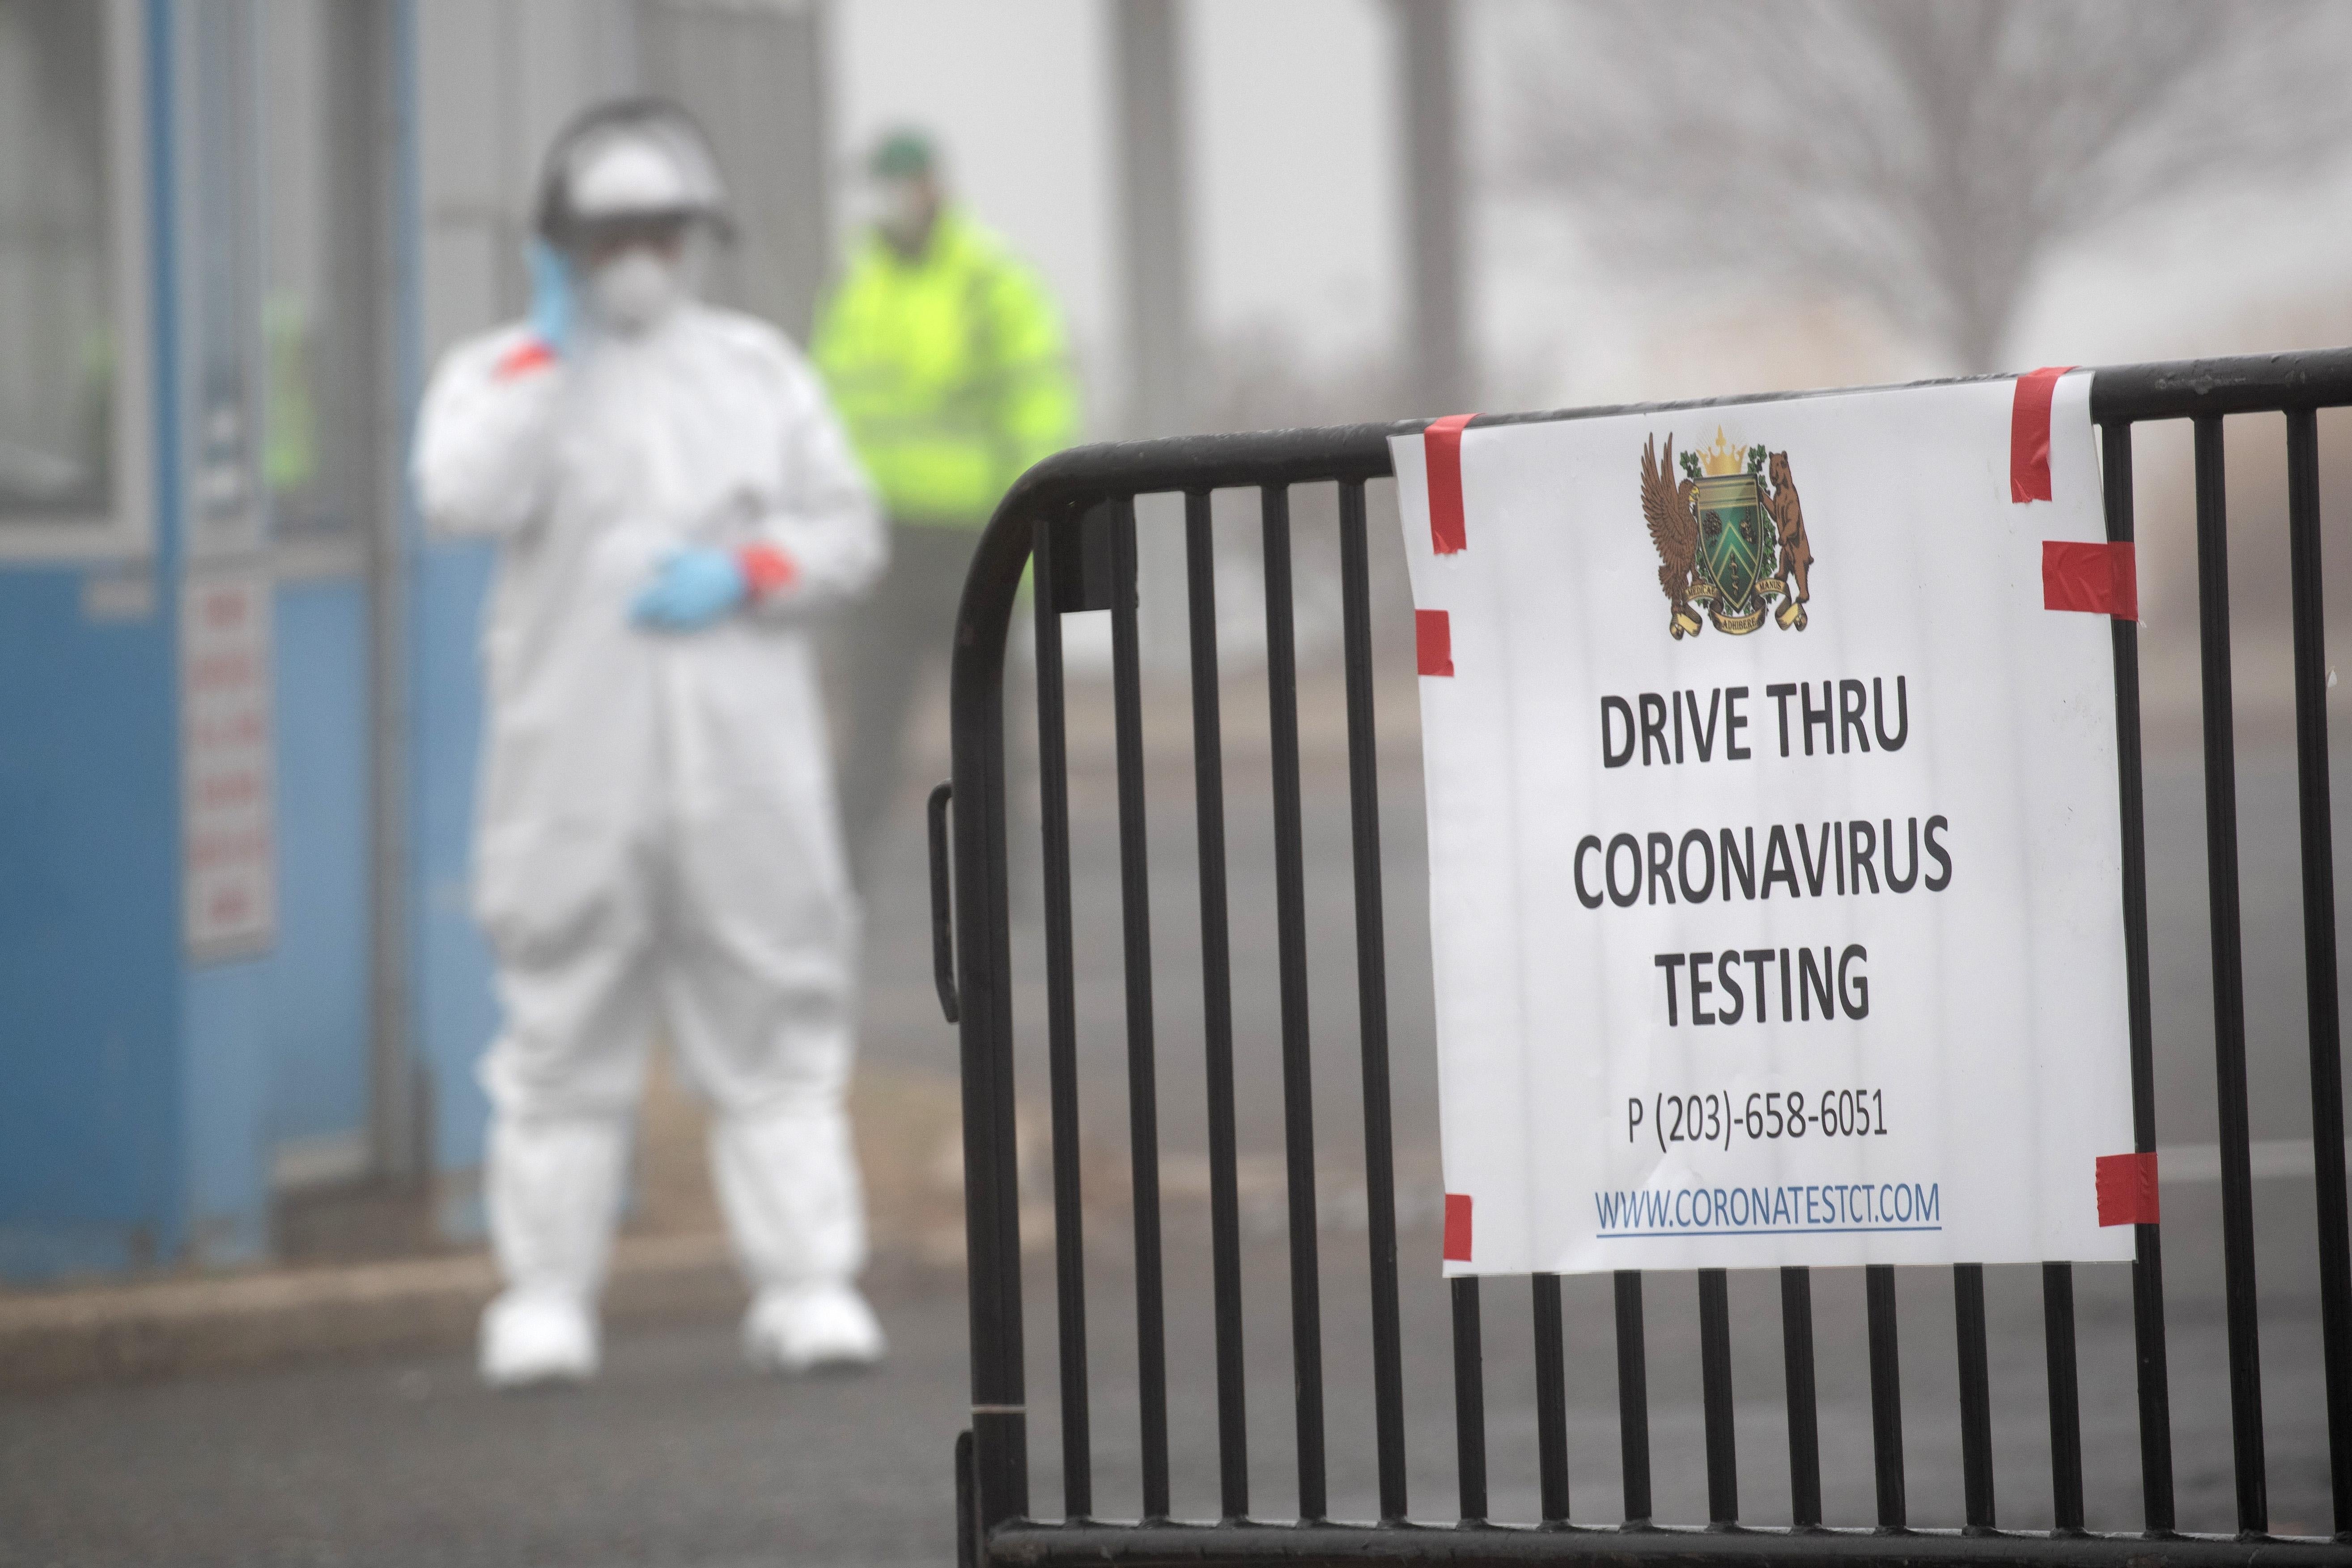 A sign sits on a barrier at a coronavirus (COVID-19) drive thru testing location operated by Murphy Medical Associates at Cummings Park on March 20, 2020 in Stamford, Connecticut.